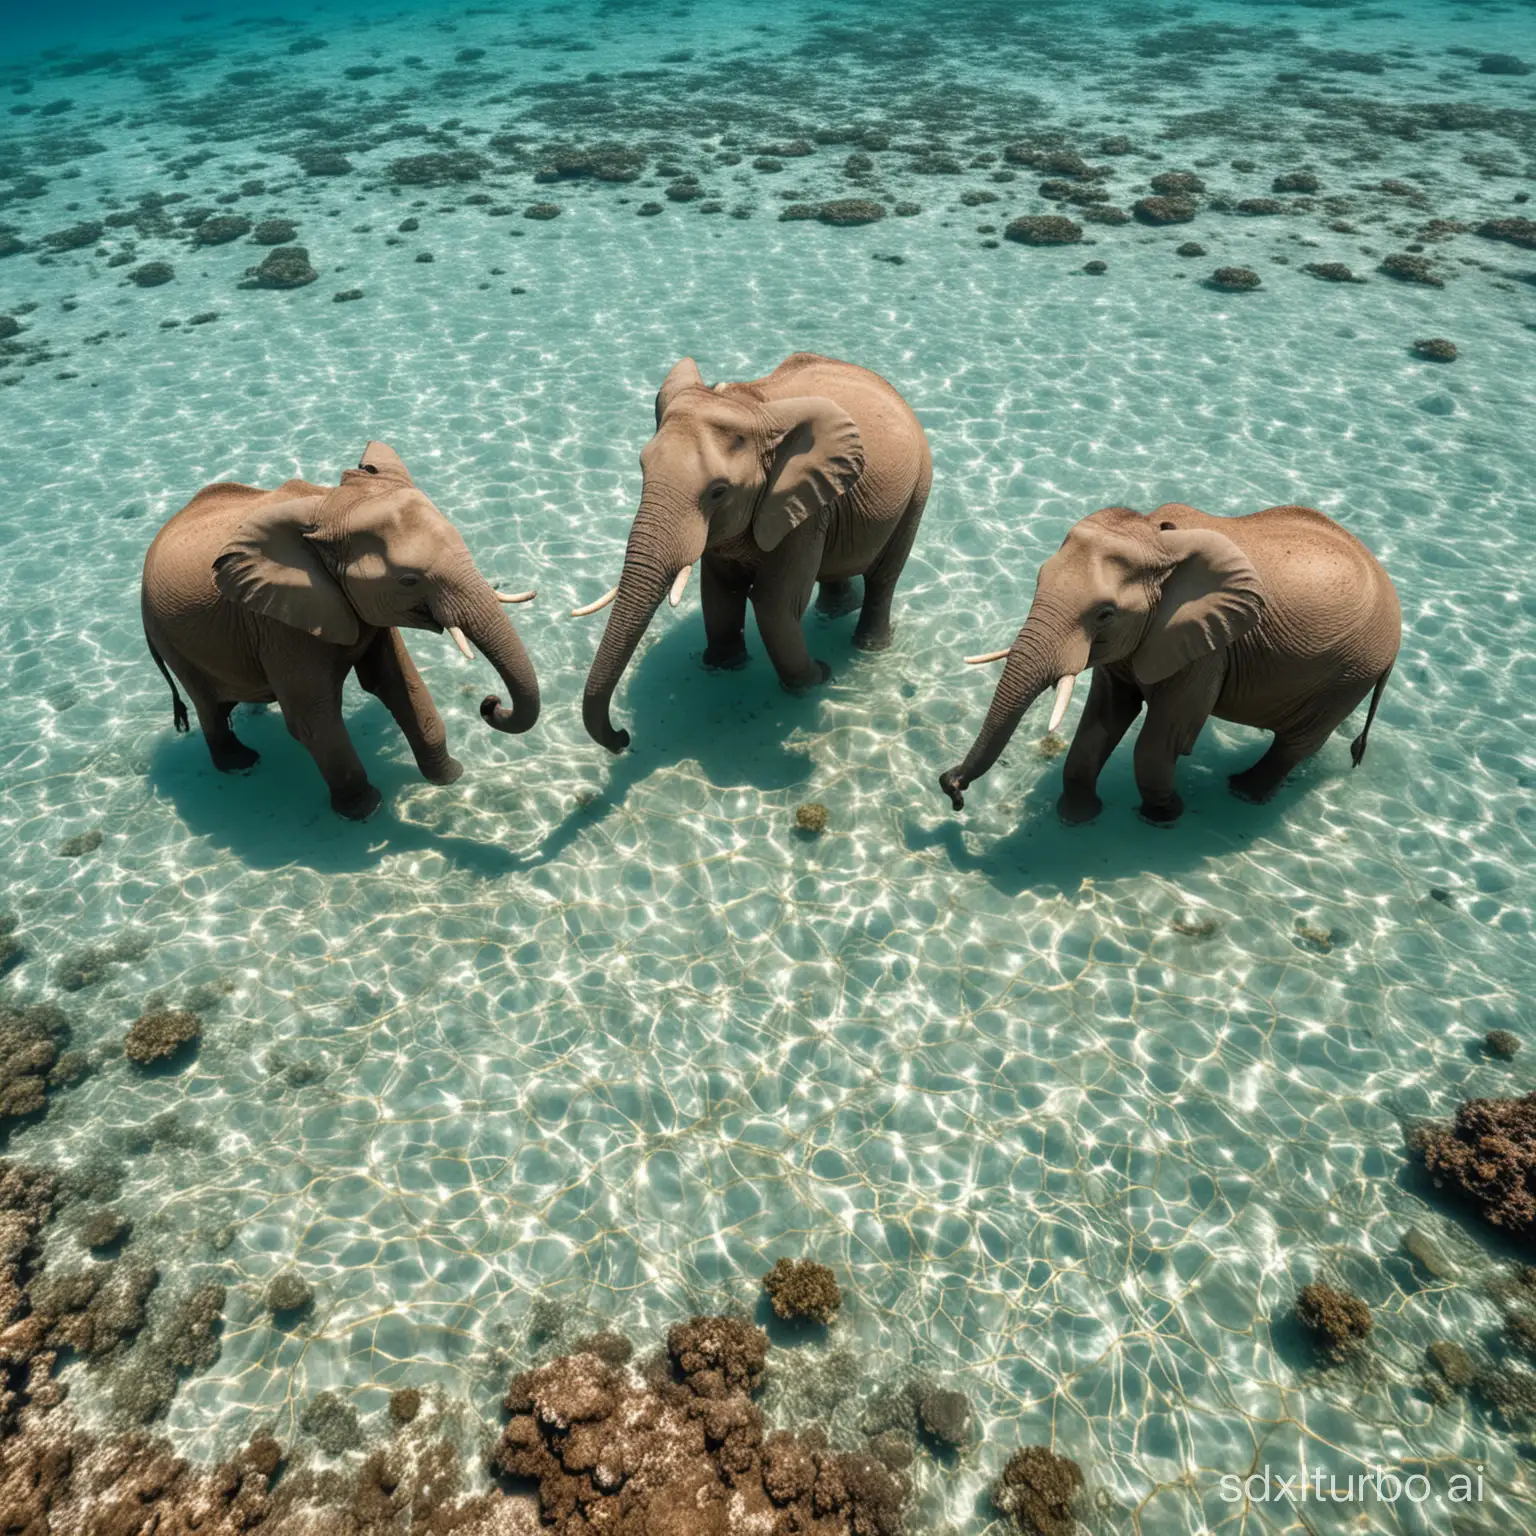 Elephants in seabed